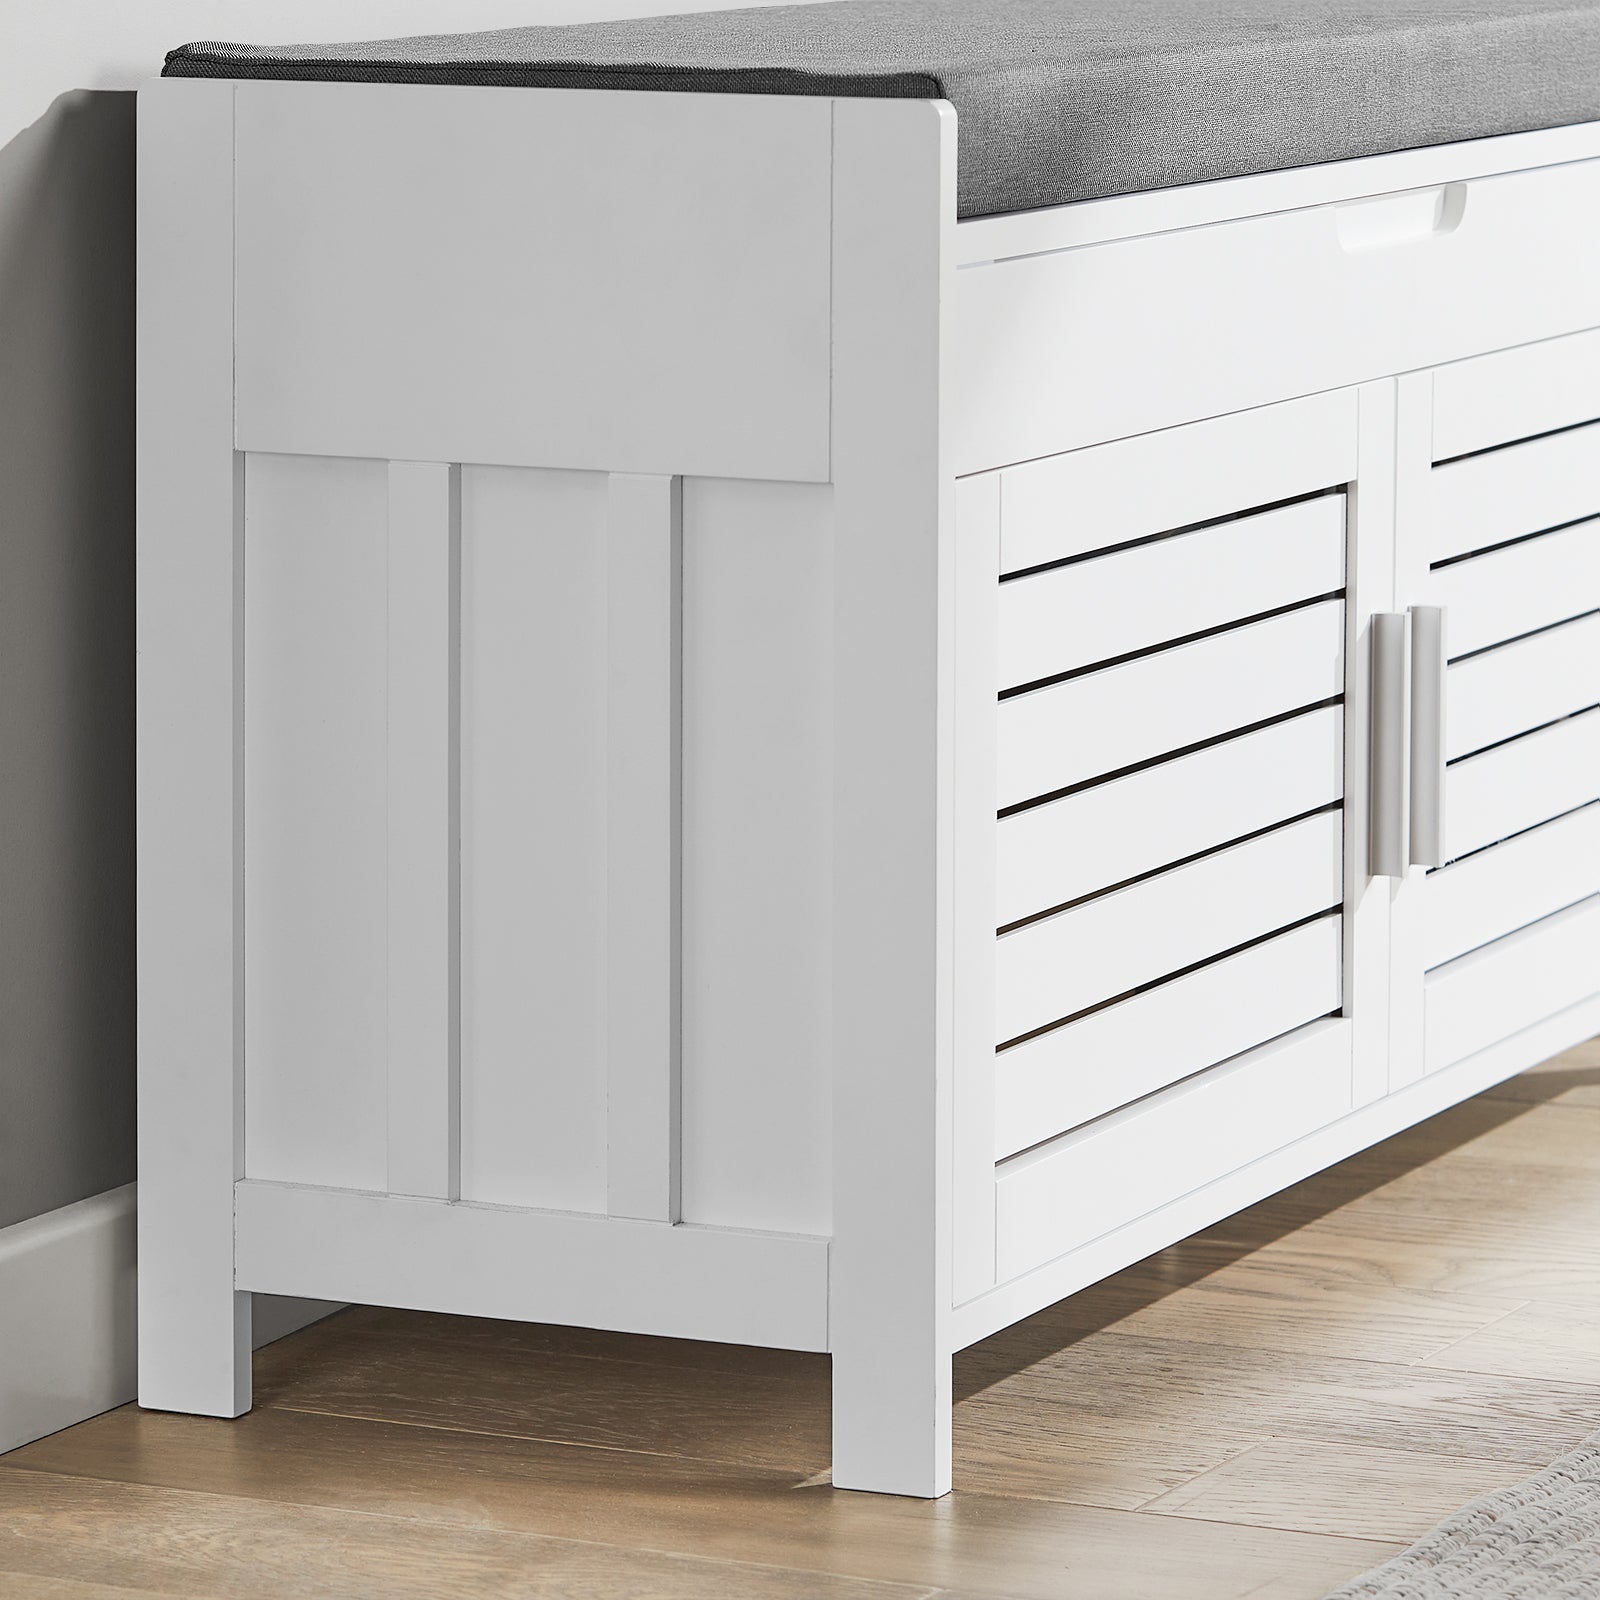 SoBuy FSR102-W, Shoe Bench Storage Cabinet with Foldable Padded Seat and 2 Doors